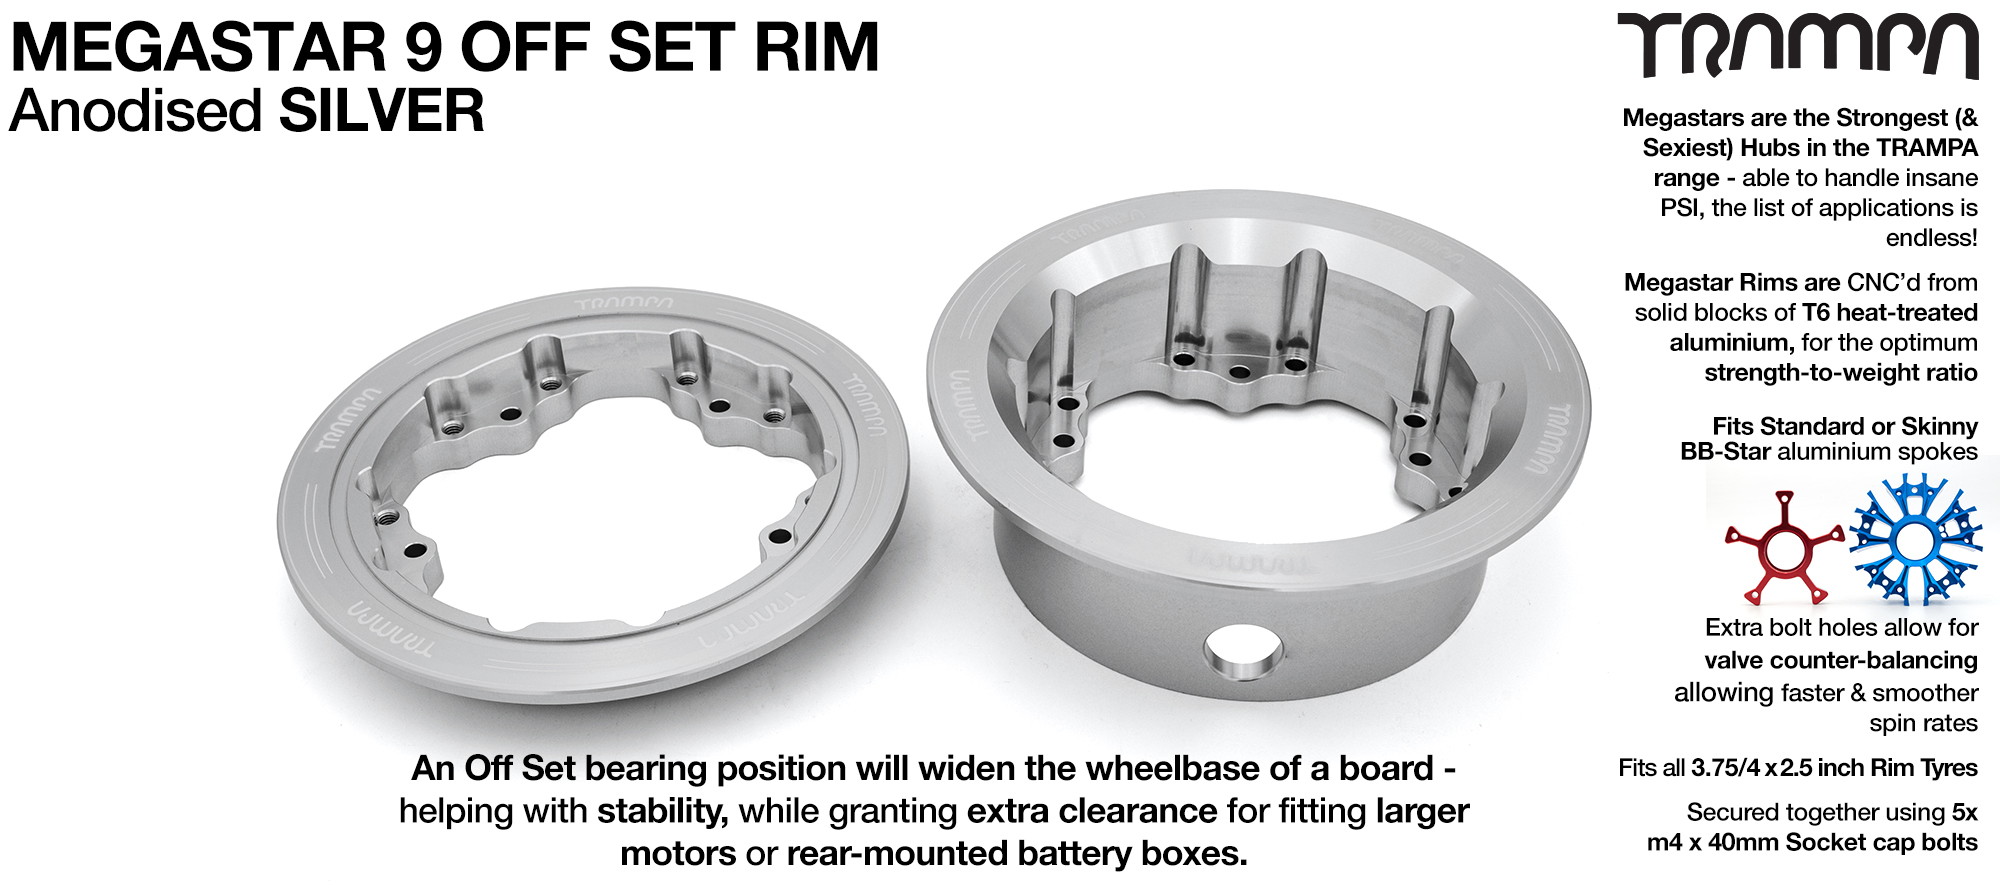 MEGASTAR 9 Rims Measure 3.75/4x 2.5 Inch & the bearings are positioned OFF-SET & accept 3.75 & 4 Inch Rim Tyres - SILVER